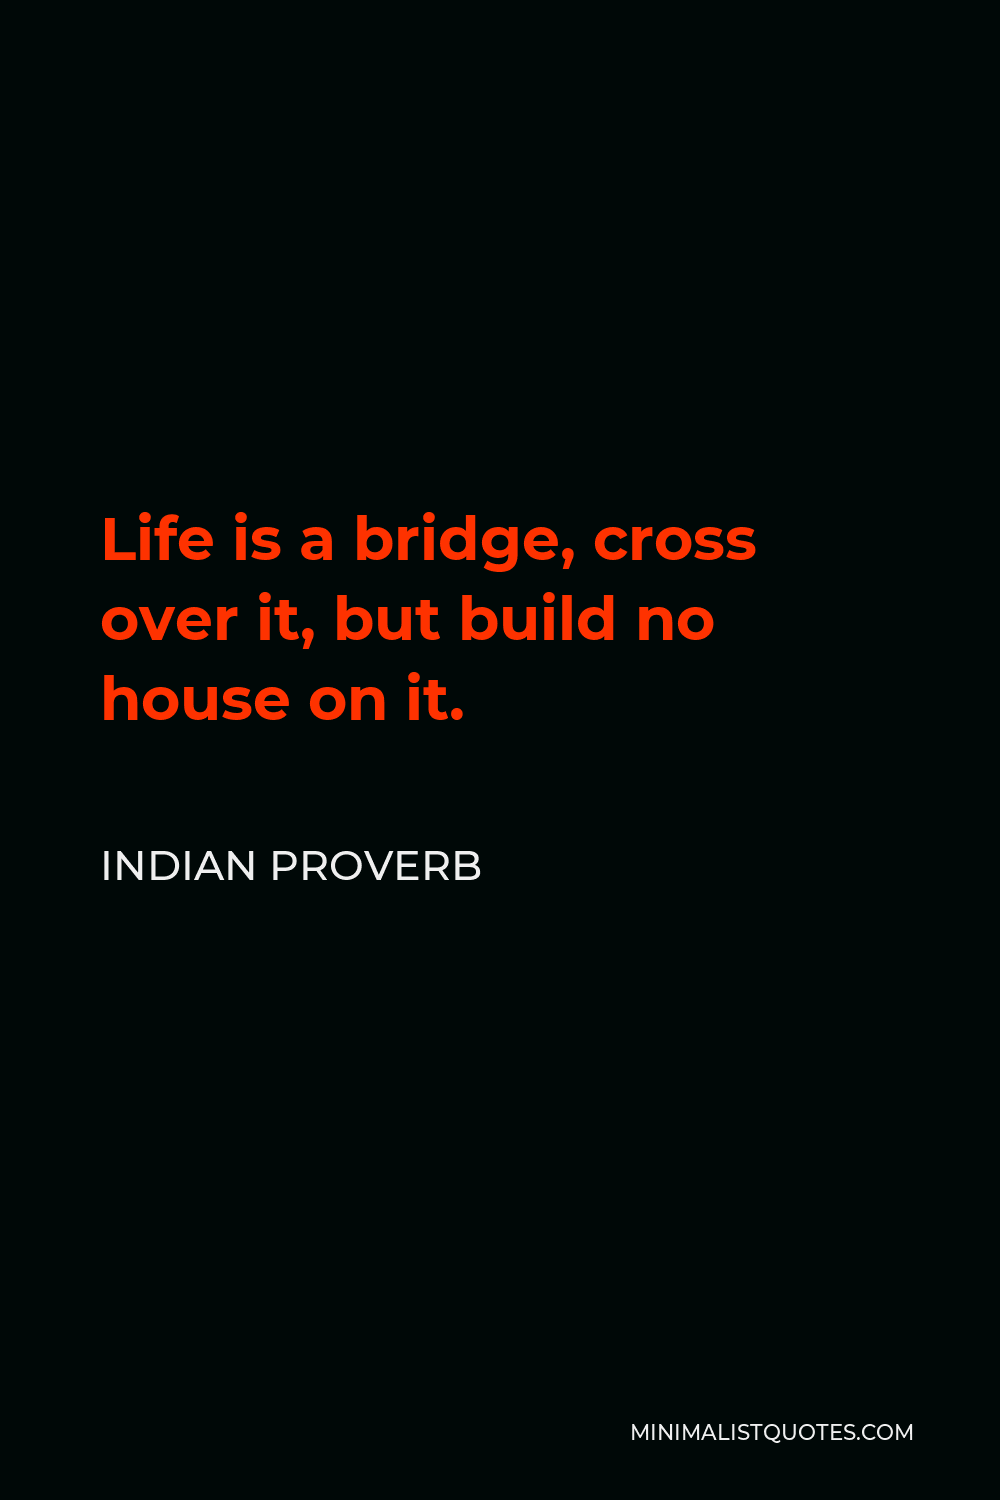 Indian Proverb Quote - Life is a bridge, cross over it, but build no house on it.